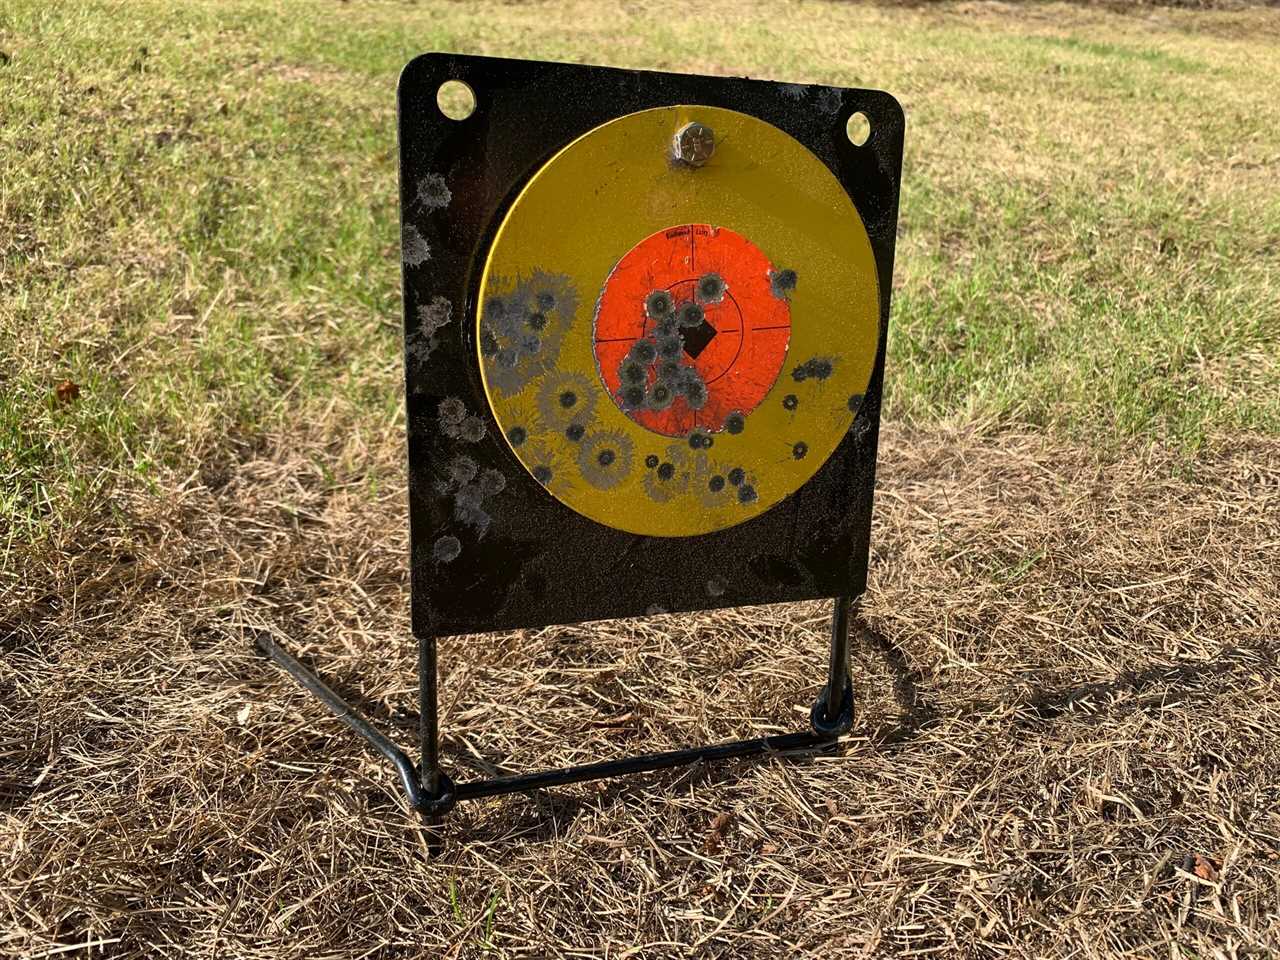 Reactive targets are a lot of fun with rimfires